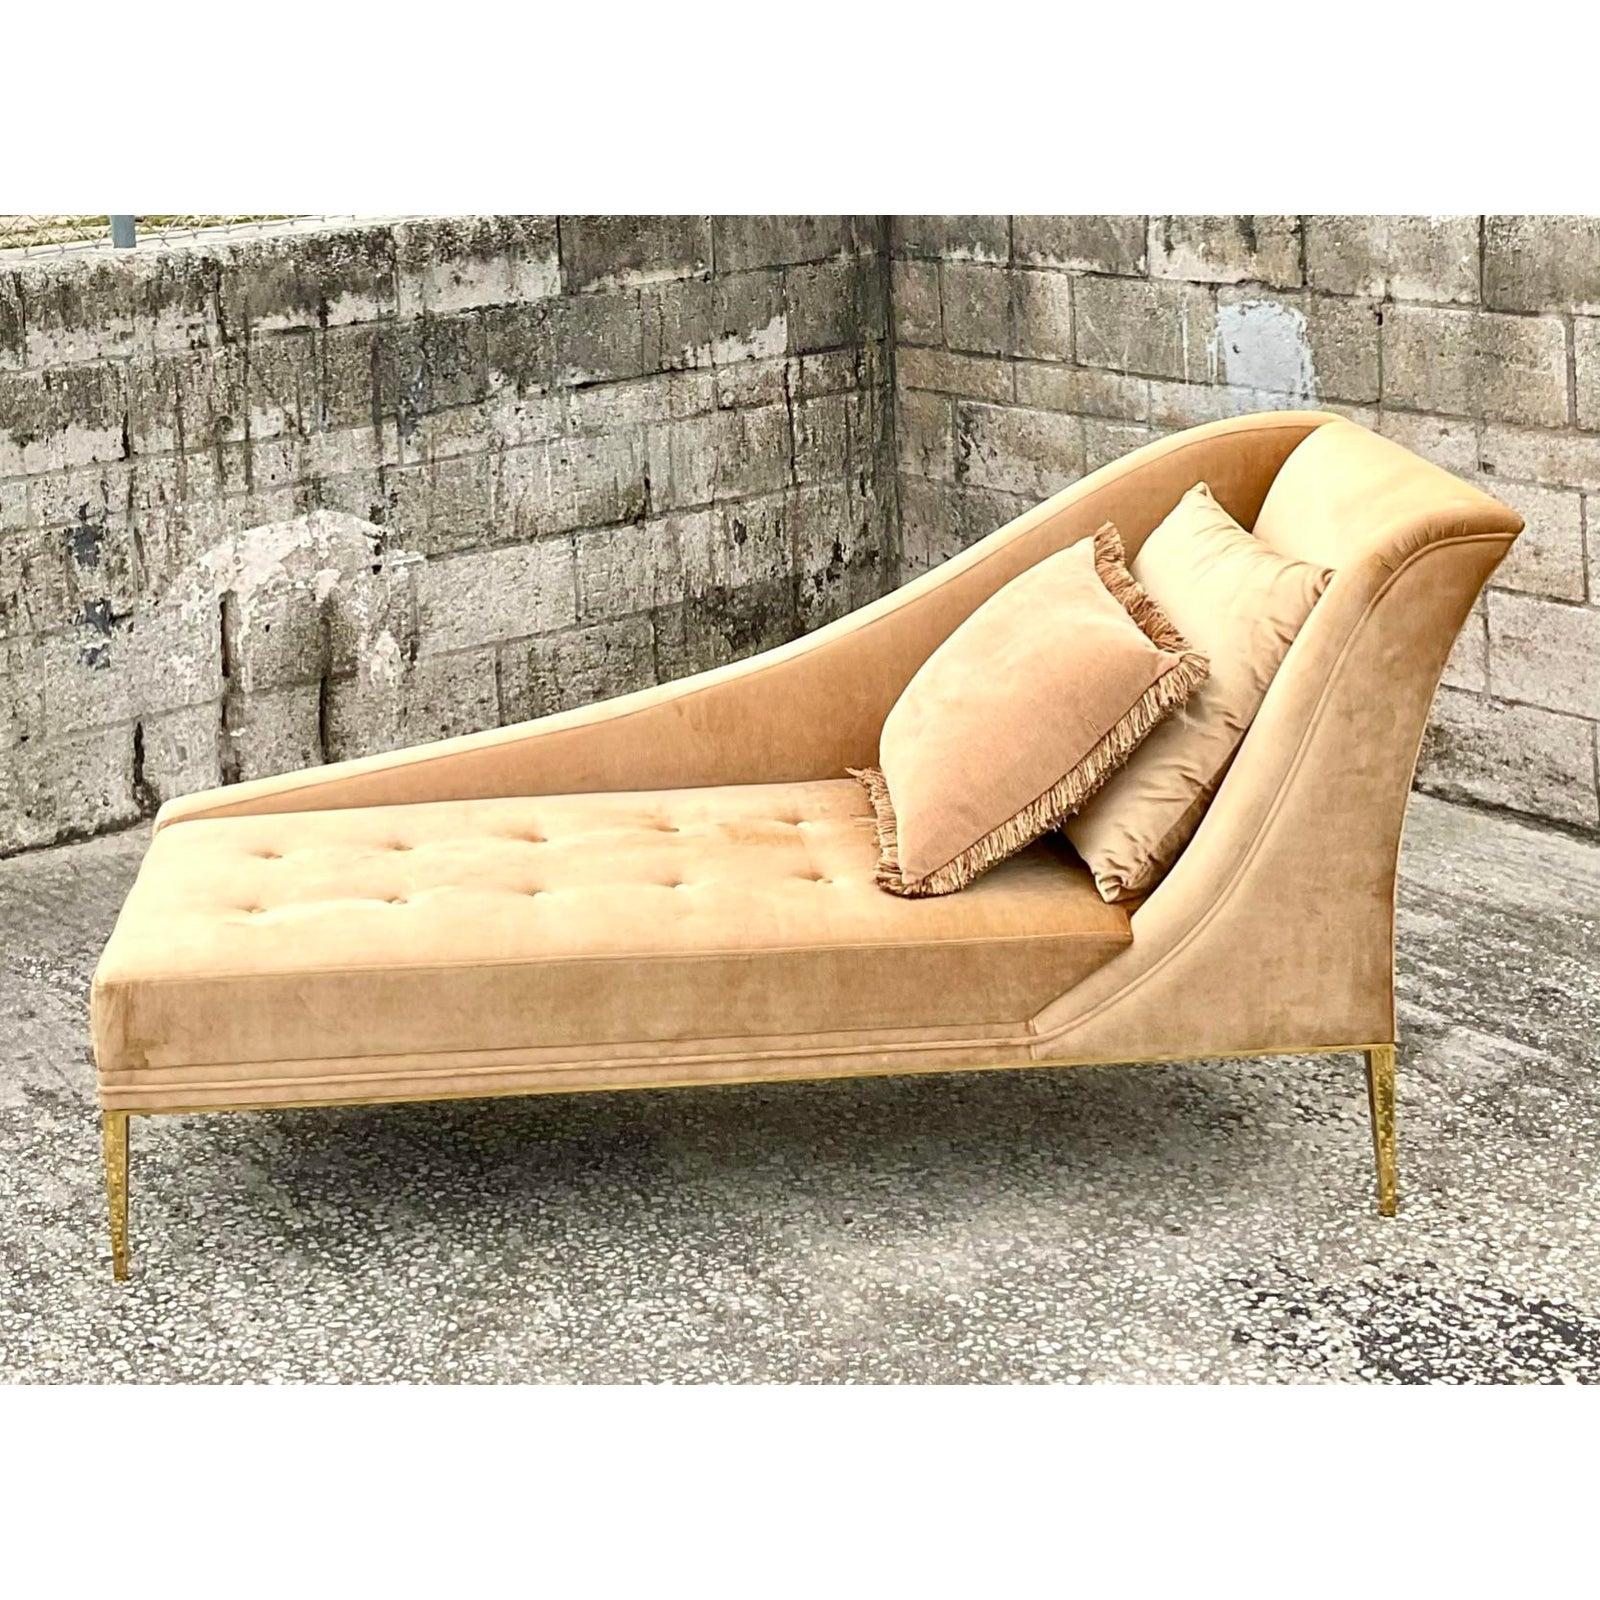 Spectacular Contemporary tufted velvet chaise lounge. Made by the iconic Koket group. This chase is the coveted Envy design in a pale peach color. Polished brass hardware. Acquired from a Palm Beach estate.